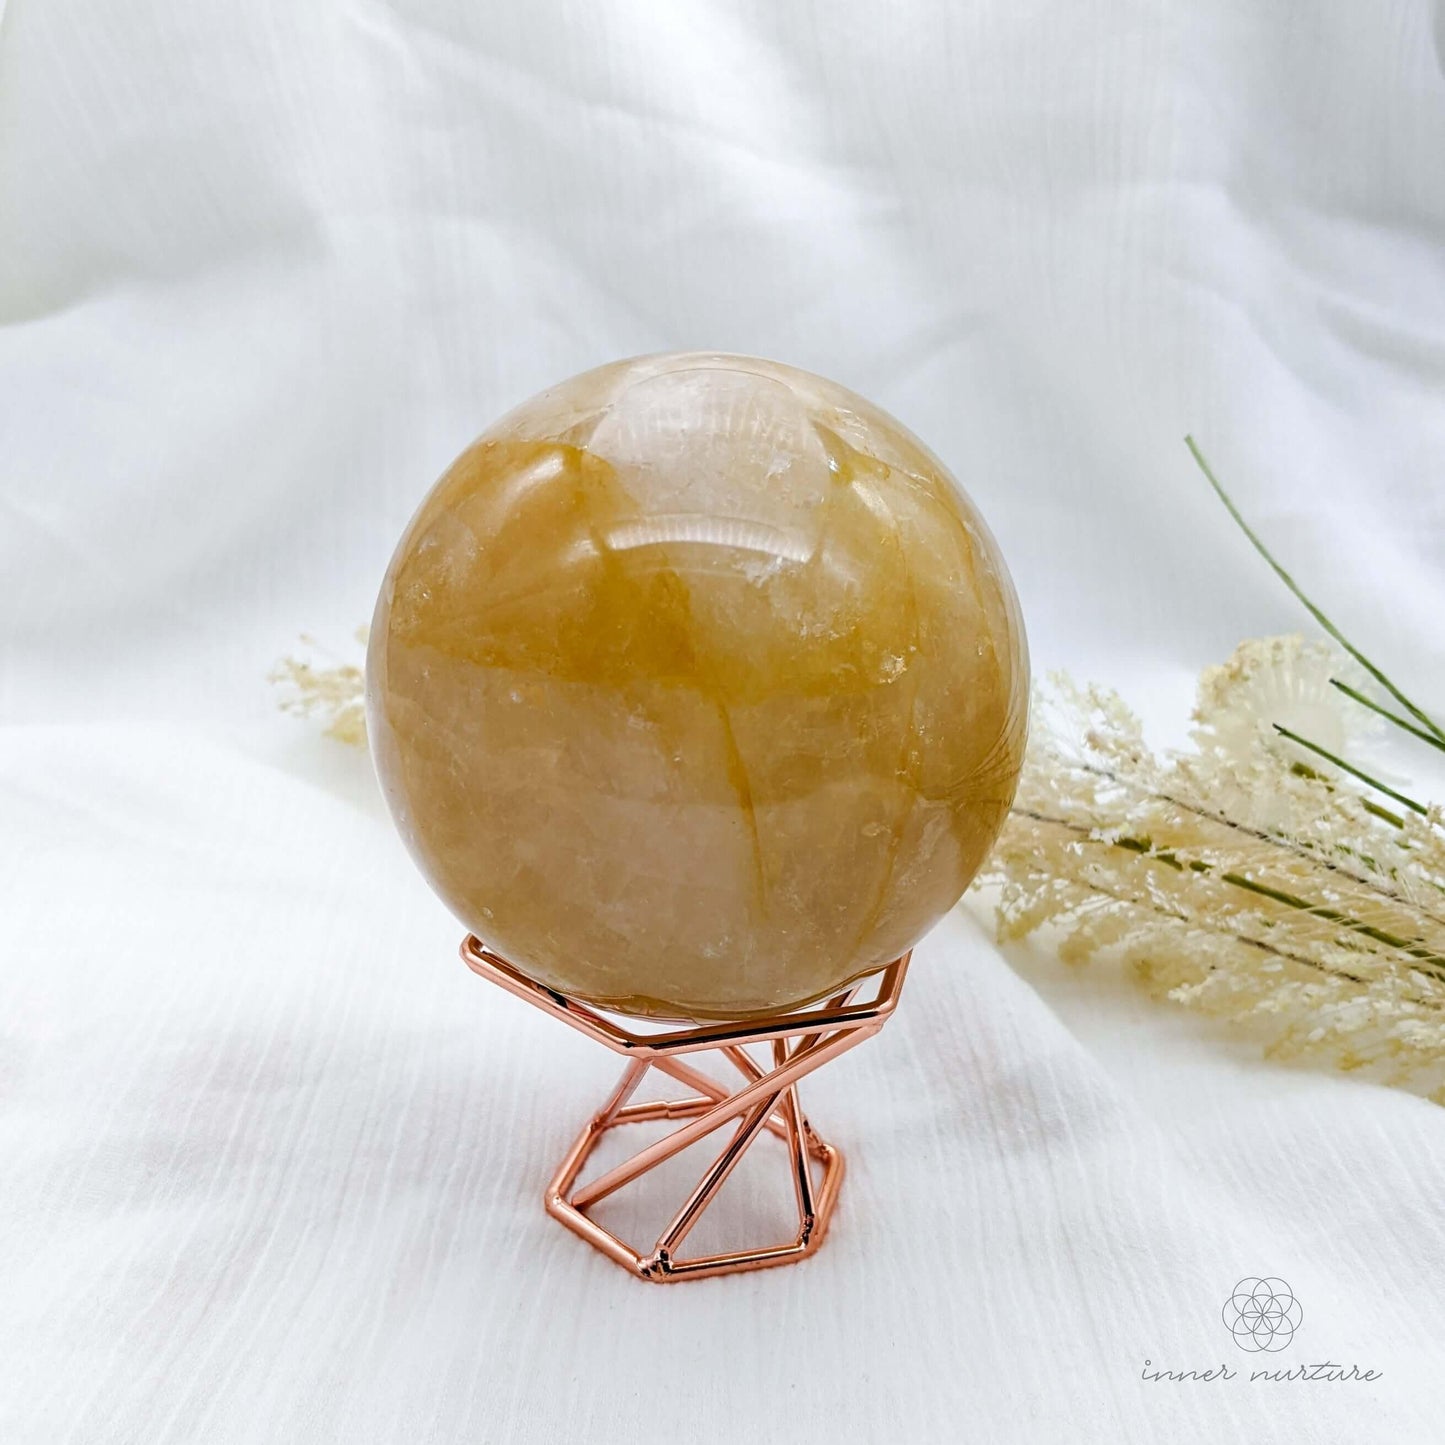 Crystal Sphere Stand | Geometric - Crystal Shop Australia | Inner Nurture - Ethically Sourced - Buy Crystals Online